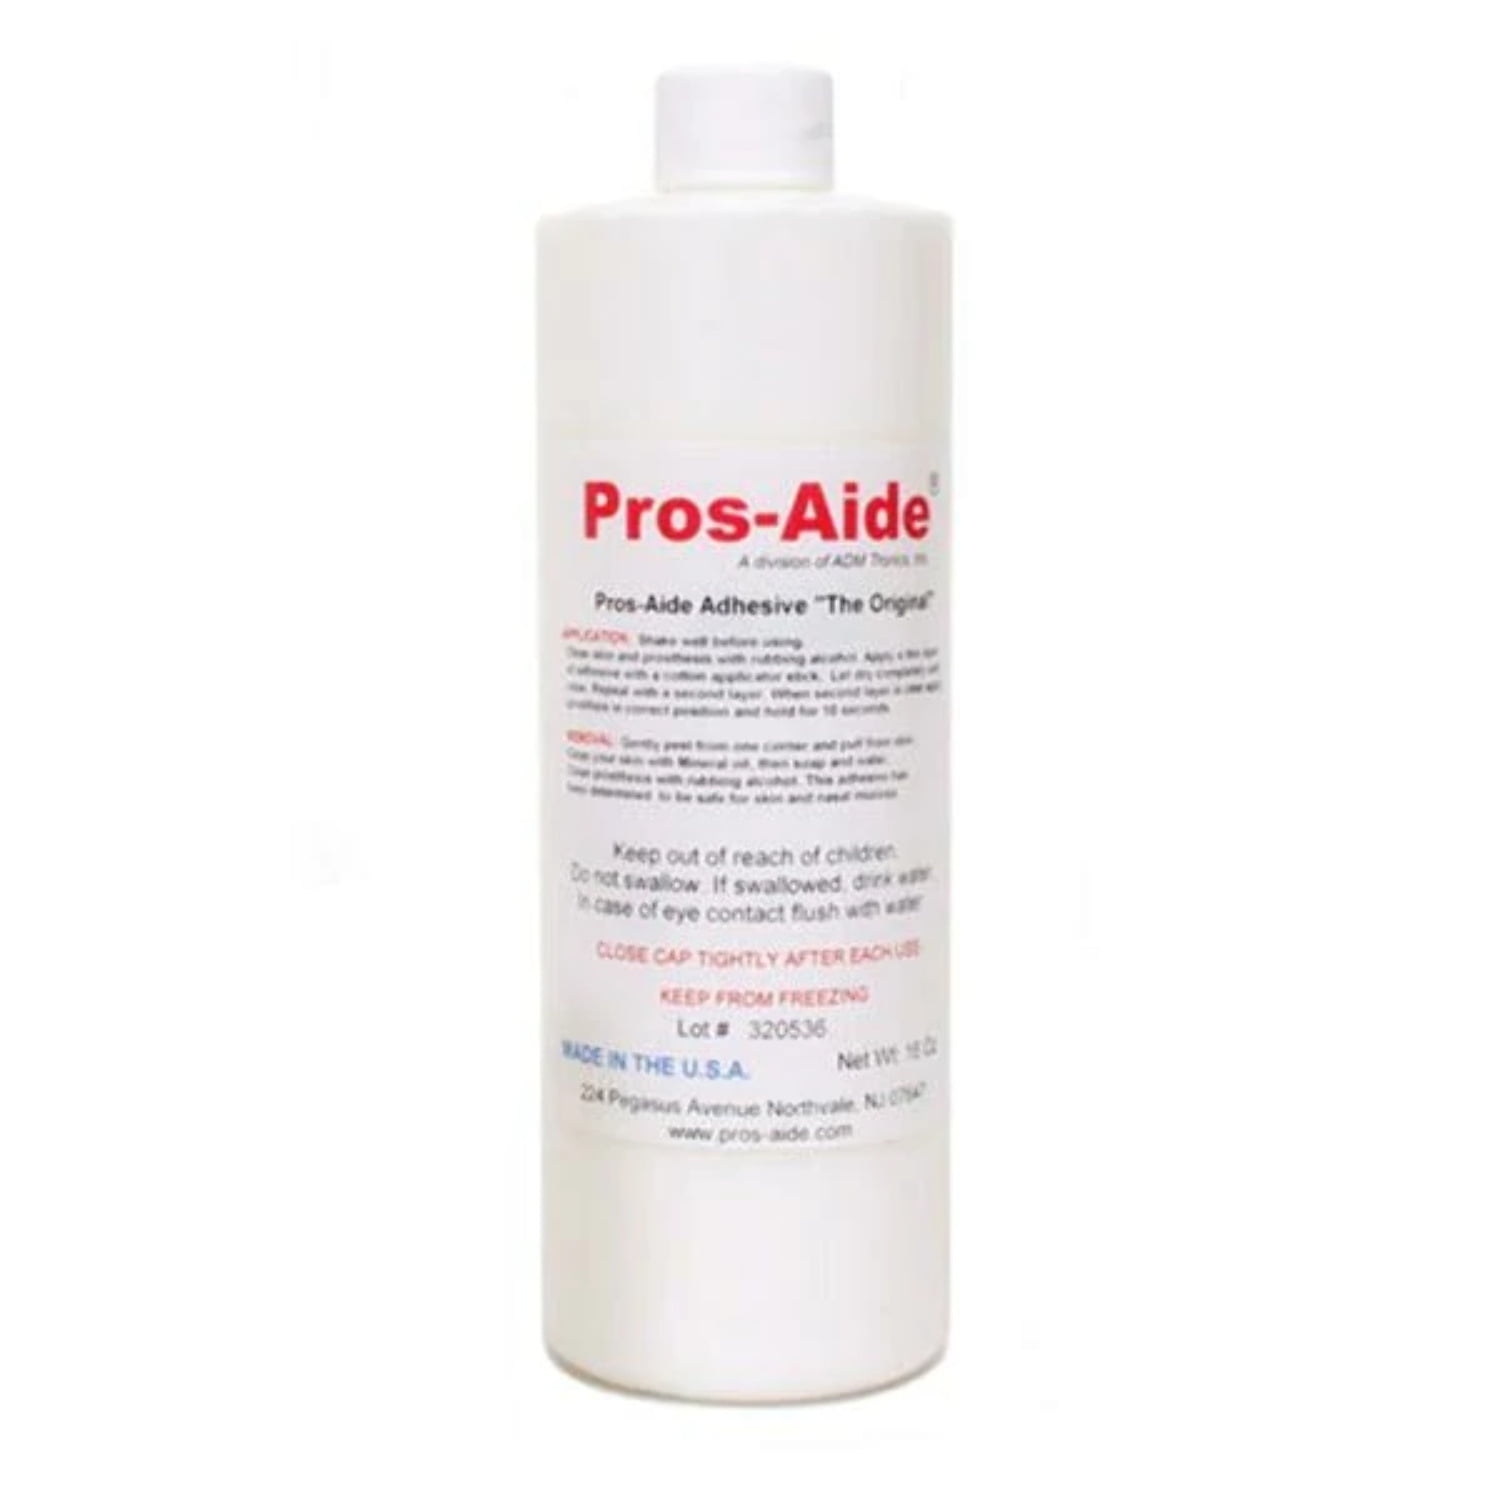 ADM Tronics Pros-Aide Adhesive - Medical Packaging 